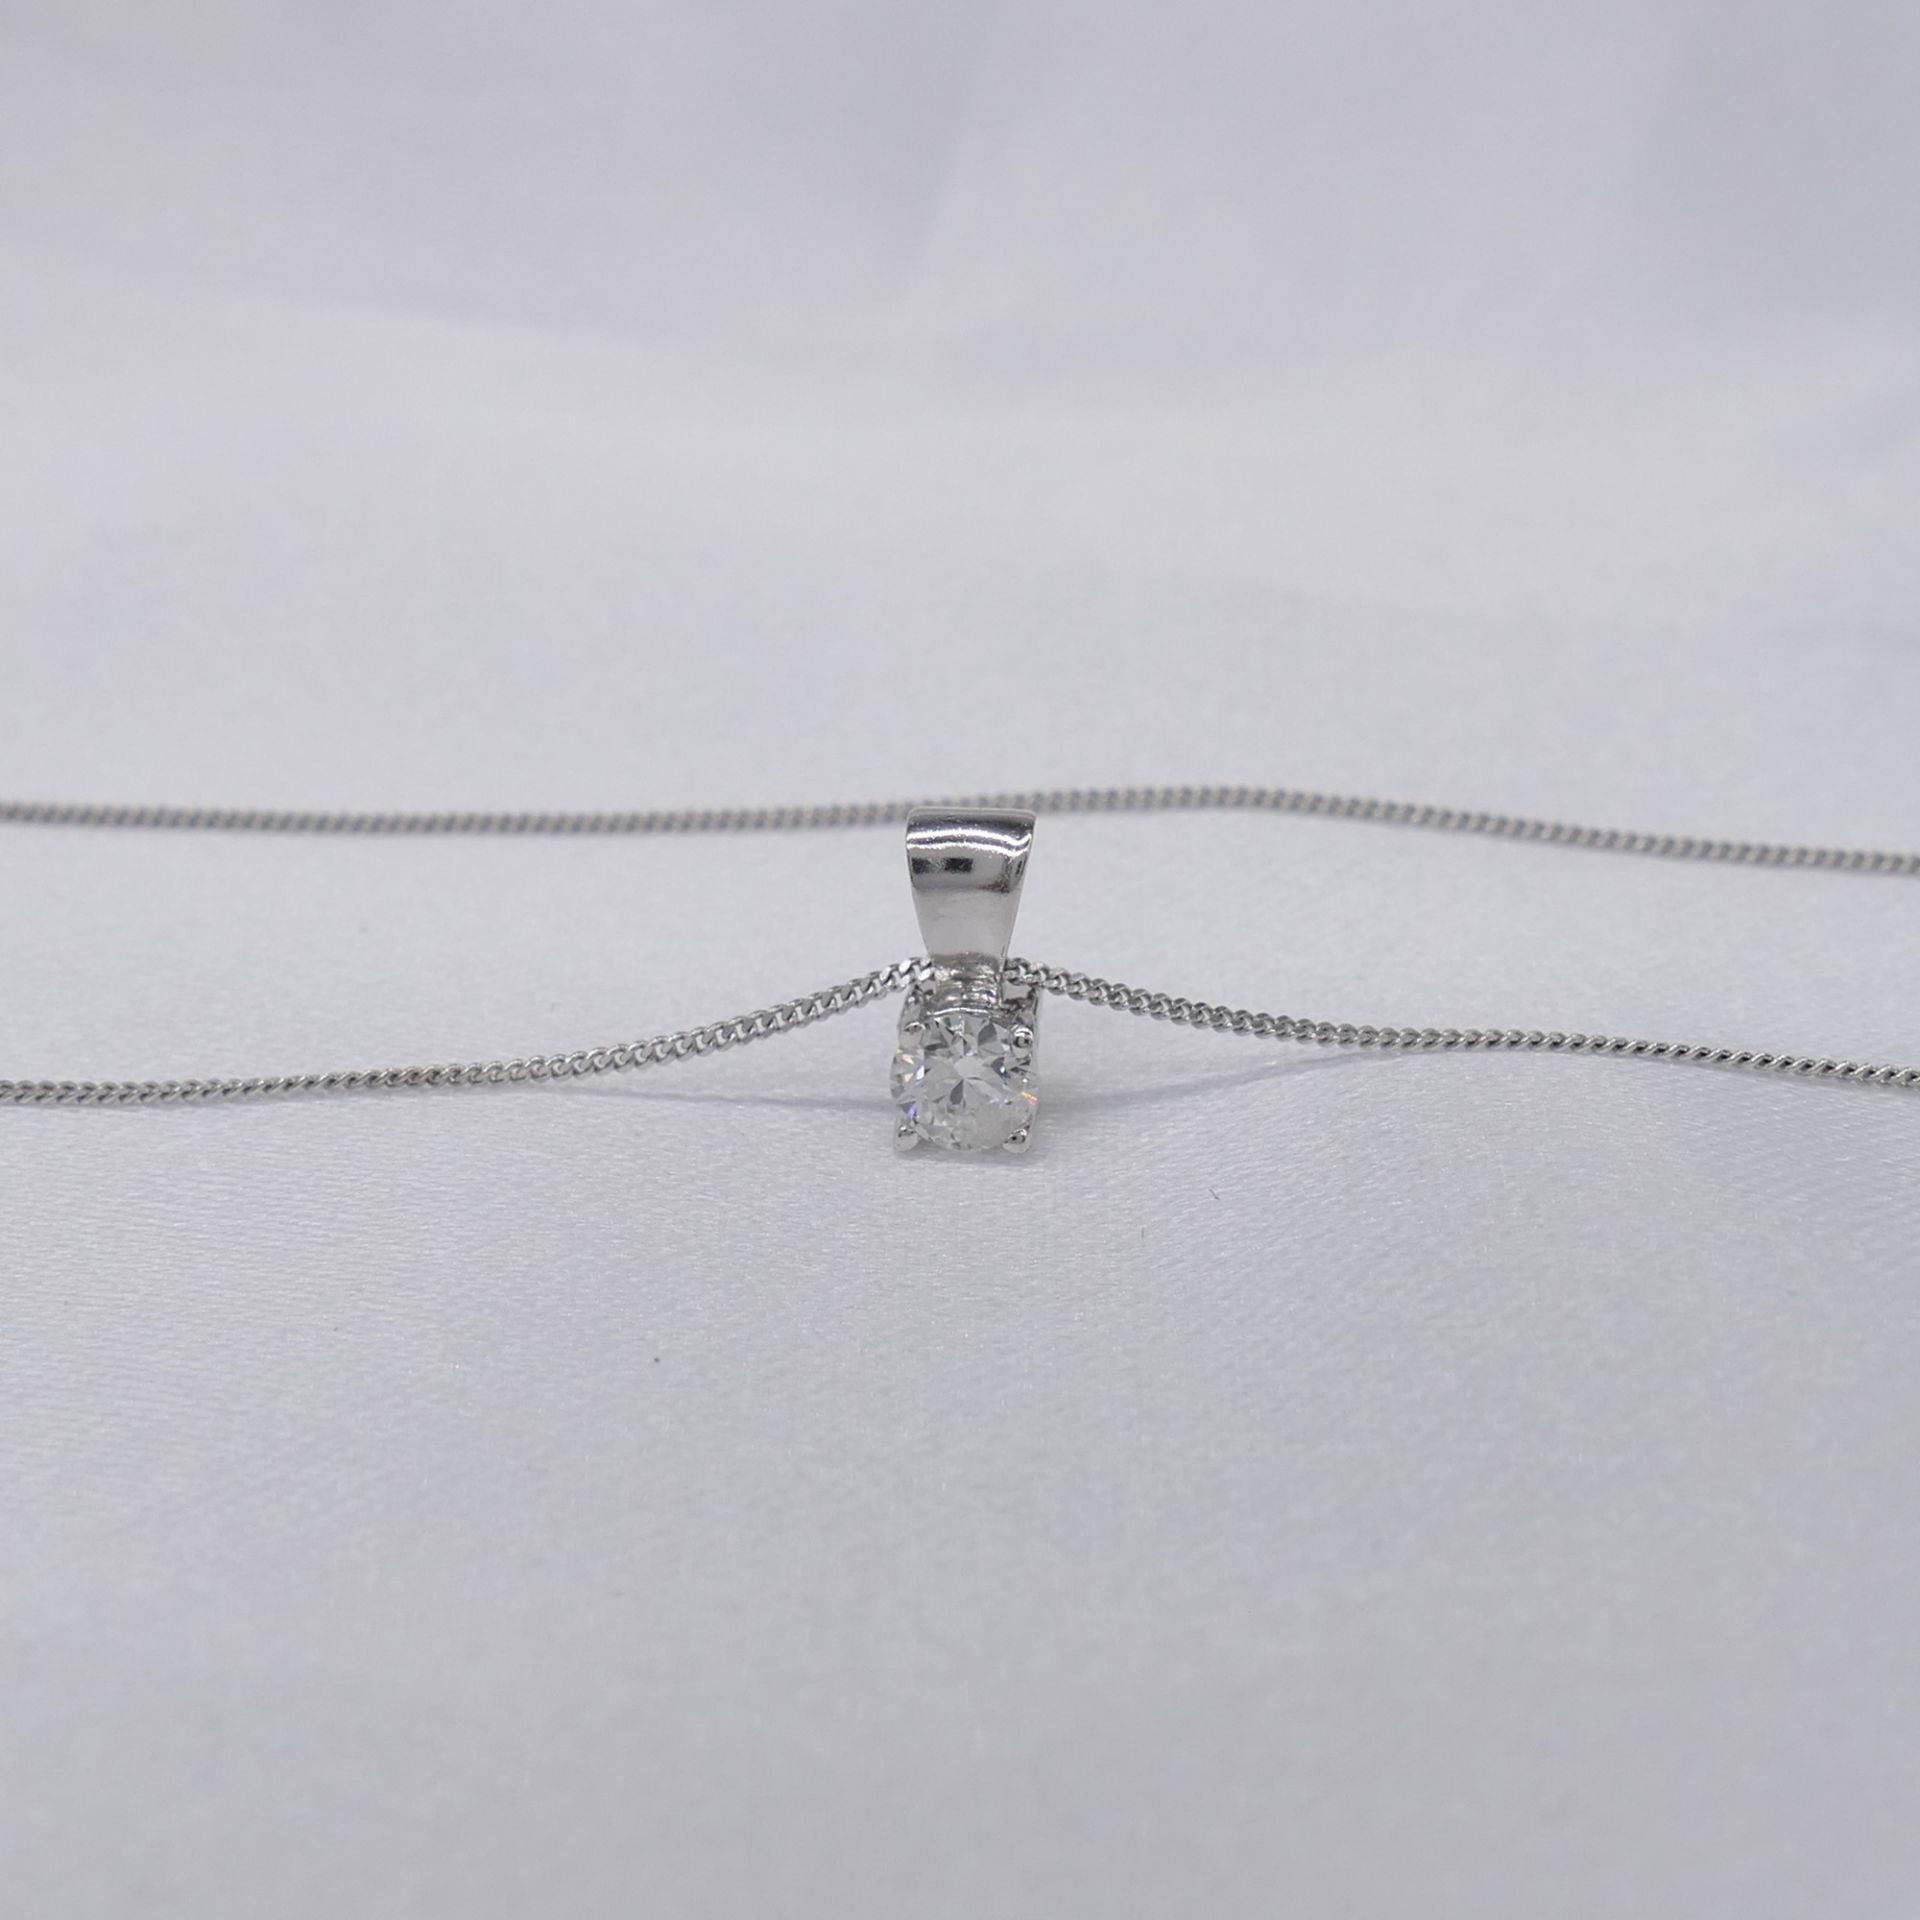 0.15 carat diamond solitaire necklace in white gol - Image 6 of 8